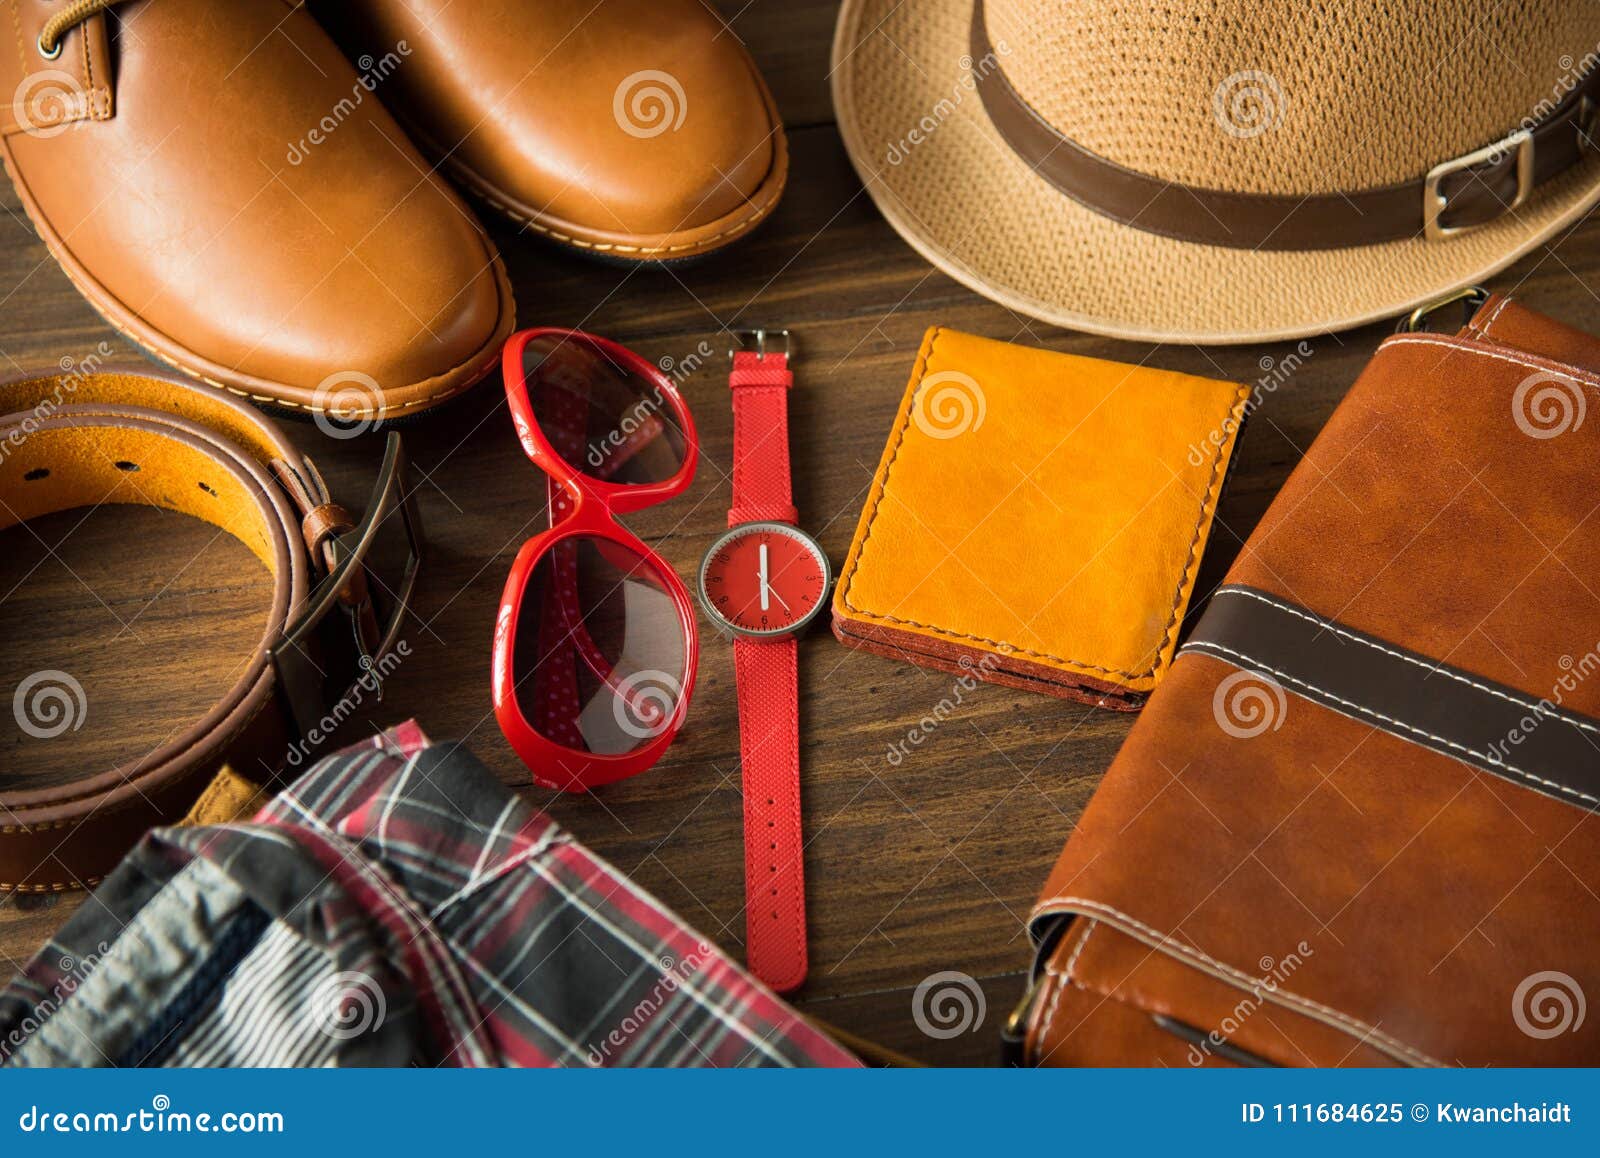 Flat Lay of Men Casual Fashion on Wooden Floor Stock Image - Image of ...